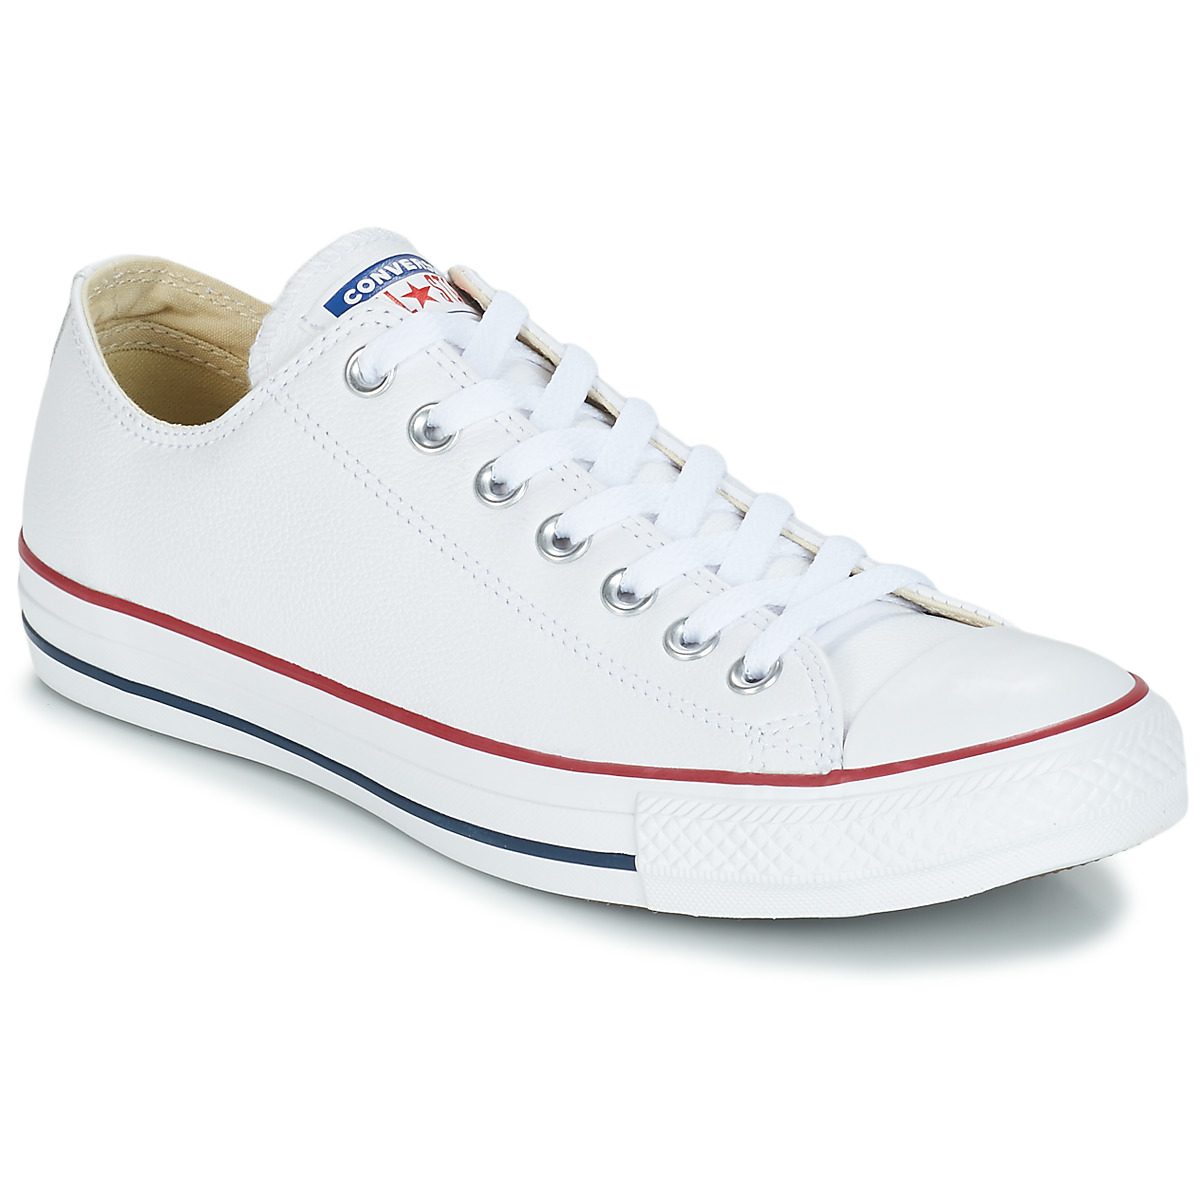 Kengät Converse Chuck Taylor All Star CORE LEATHER OX 37 1/2